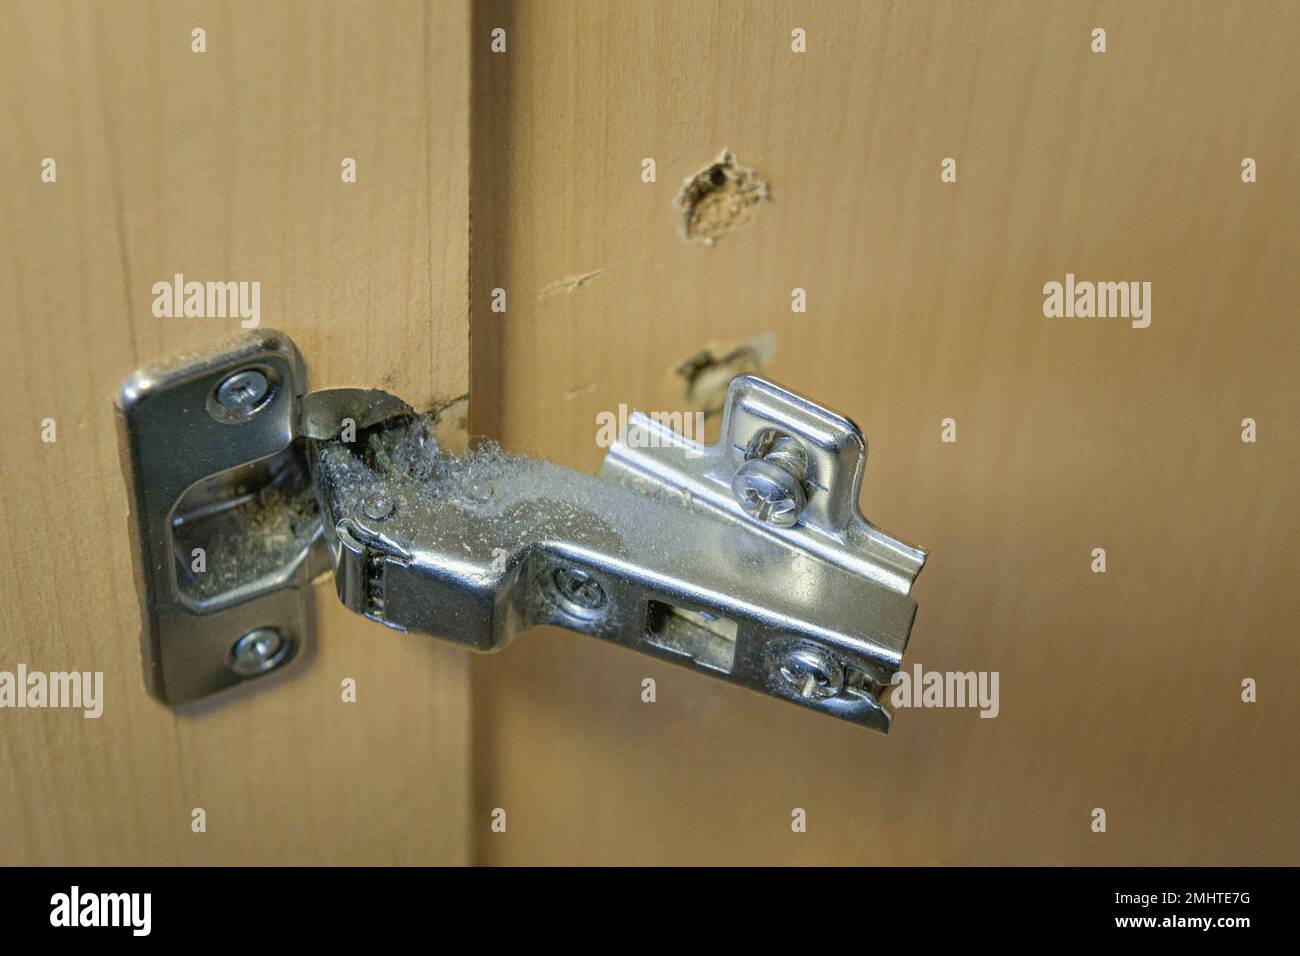 Broken furniture fittings in the linen closet. Close-up with details Stock Photo